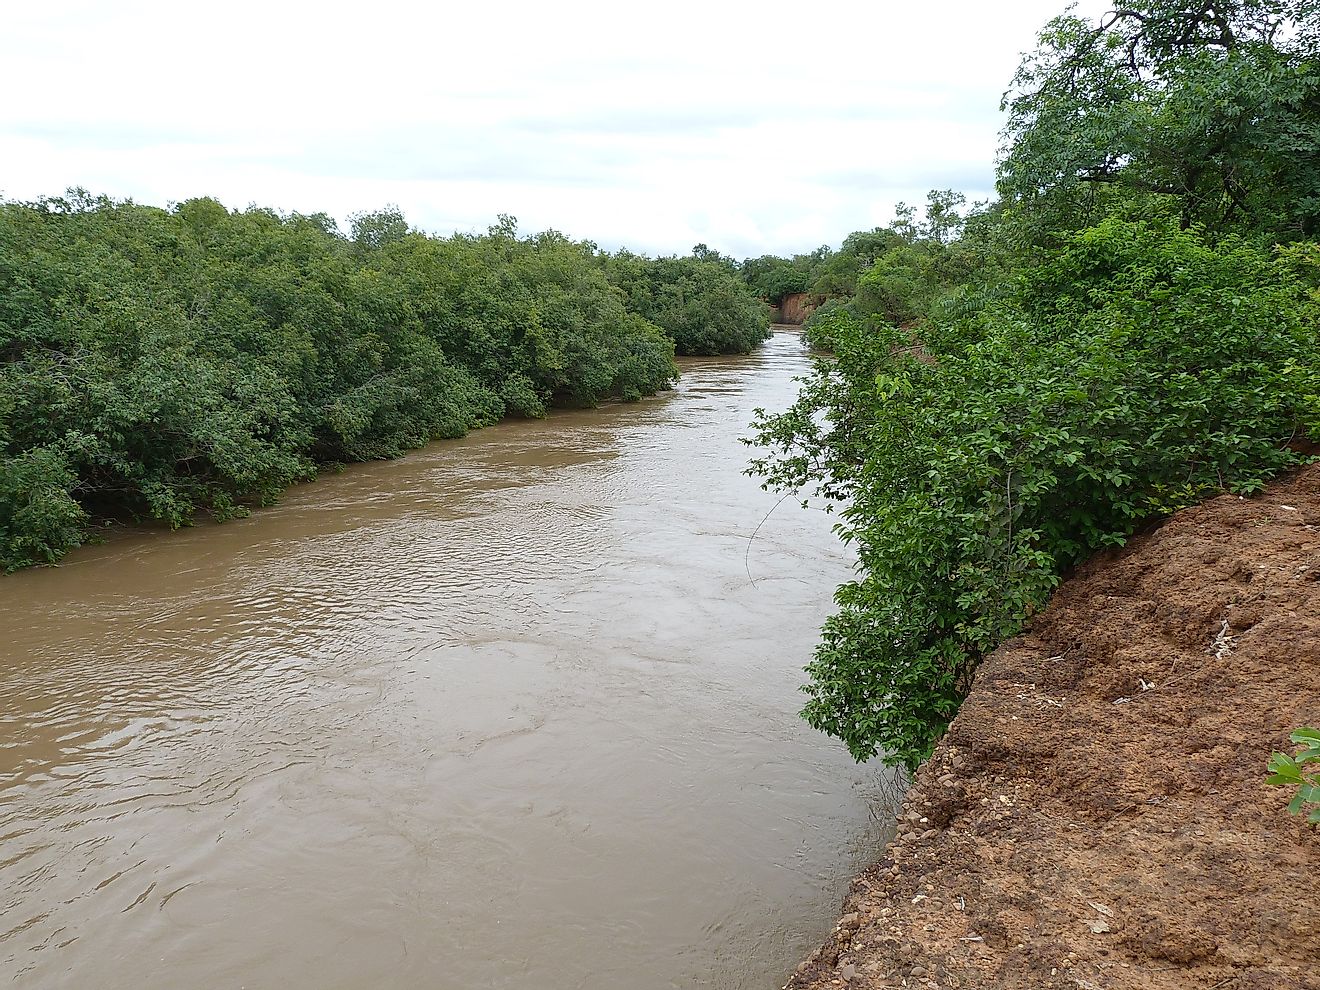 Faleme River with trees on either side of the banks. Image credit https://commons.wikimedia.org/wiki/File:Forested_island_in_the_Faleme_River.jpg